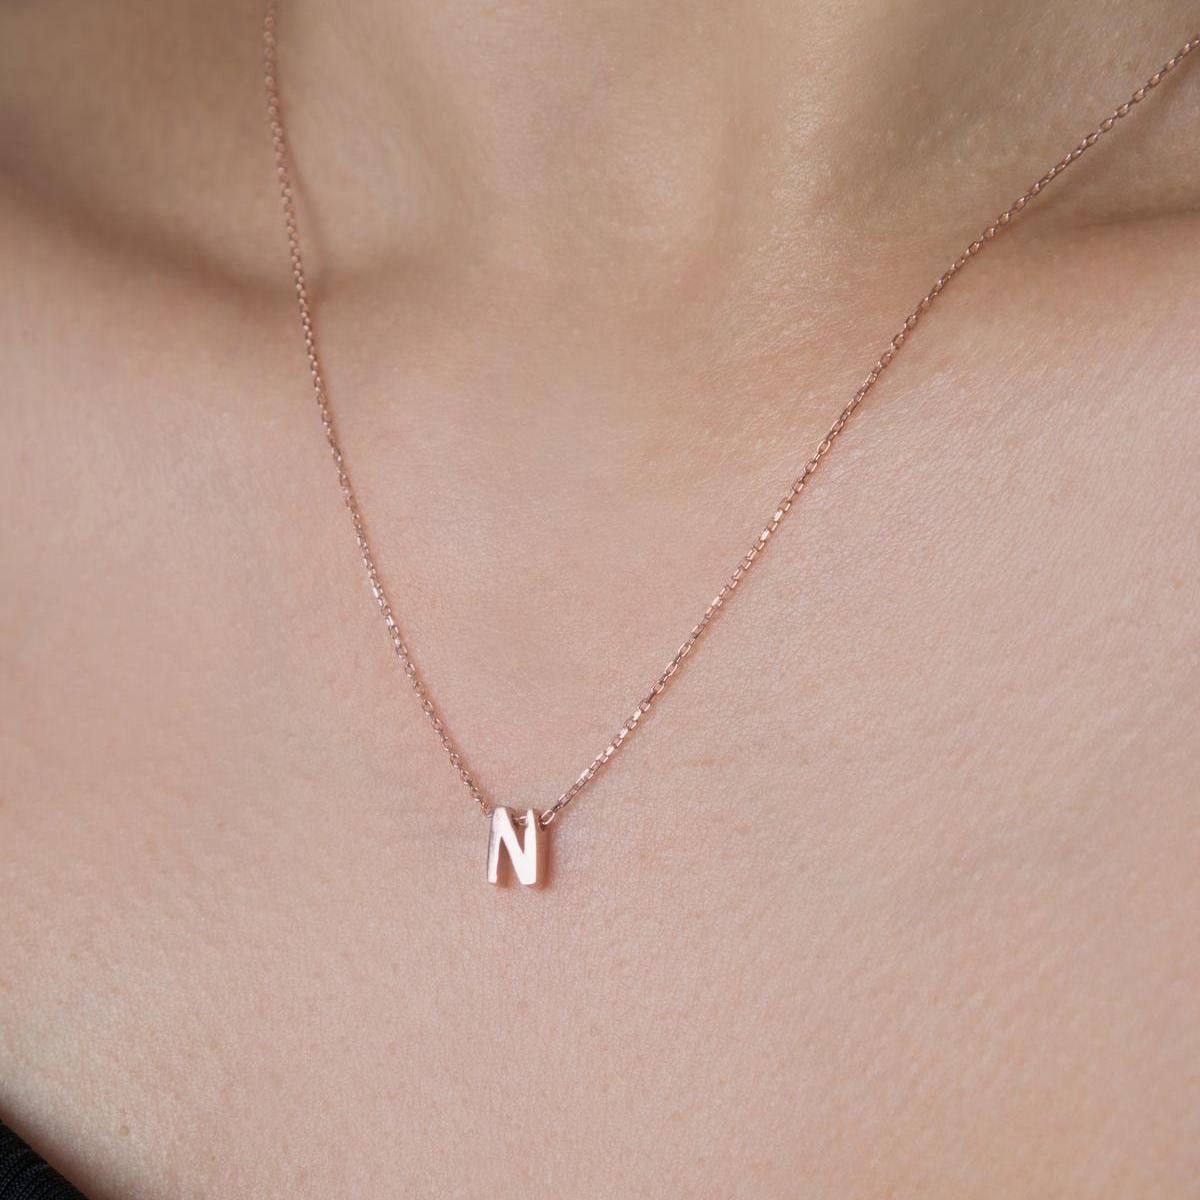 N Initial Necklace Rose • Rose Gold Initial Necklace • Gift For Her - Trending Silver Gifts